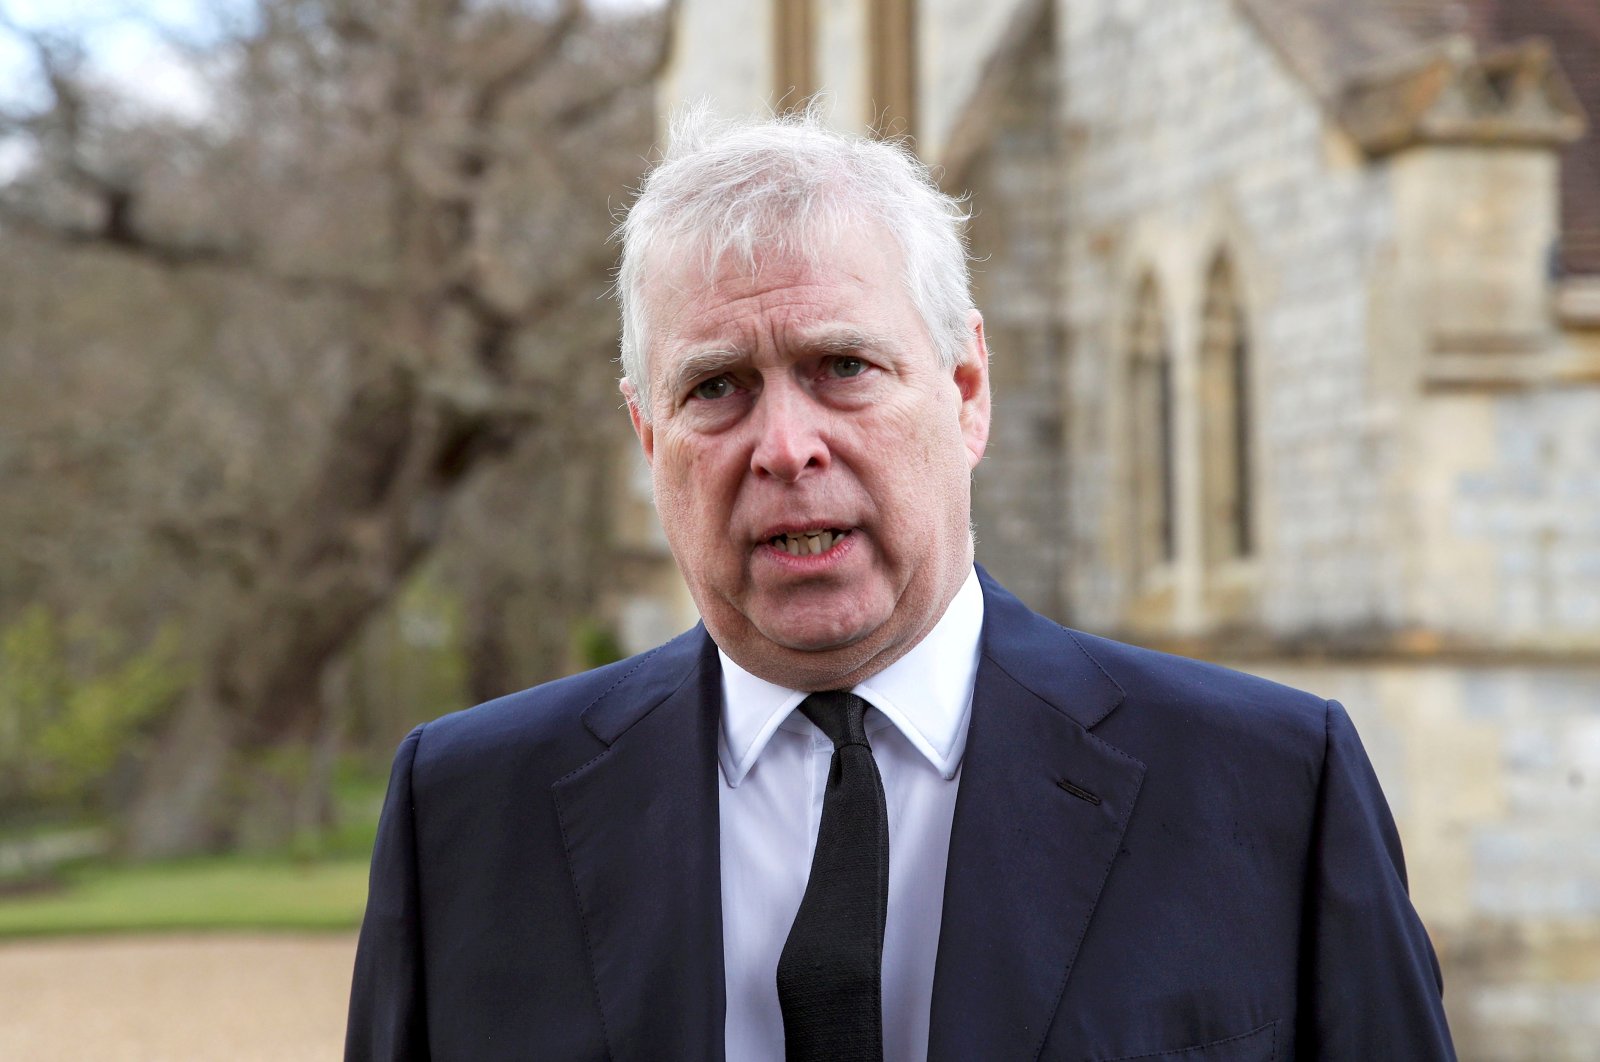 Prince Andrew speaks to the media at the Royal Chapel of All Saints at Windsor Great Park following the death of his father Prince Philip at age 99, United Kingdom, April 11, 2021. (Reuters Photo)